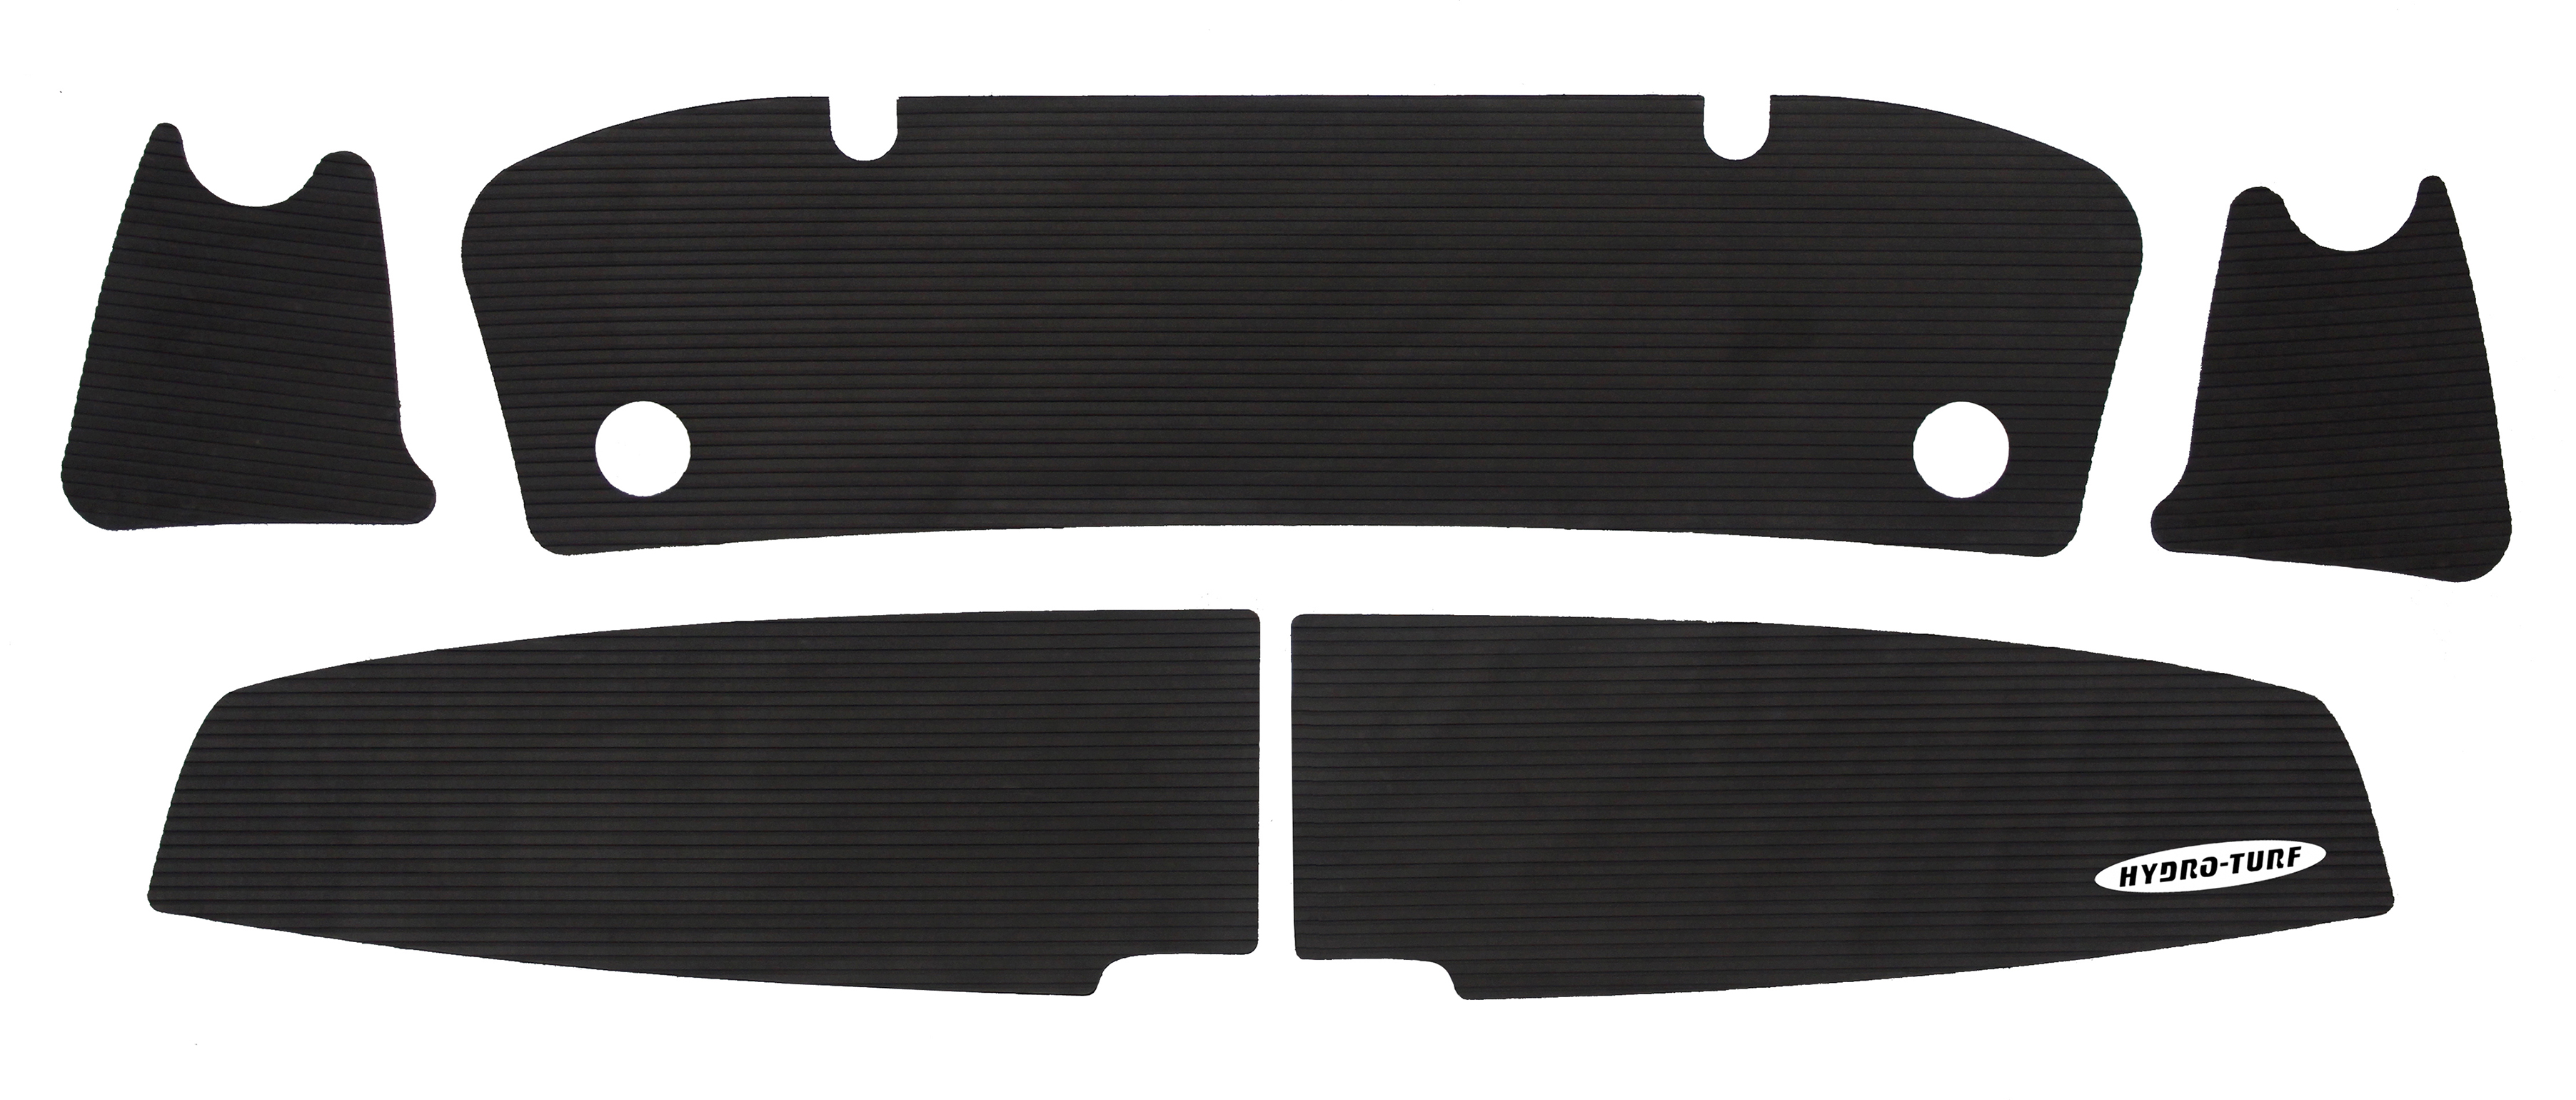 Hydro-Turf Rear Boarding Step Mats Only For Yamaha 2212 X / 212 Ss / Ar 210 / Sx 210 (12-16) - Y08R - Click Image to Close